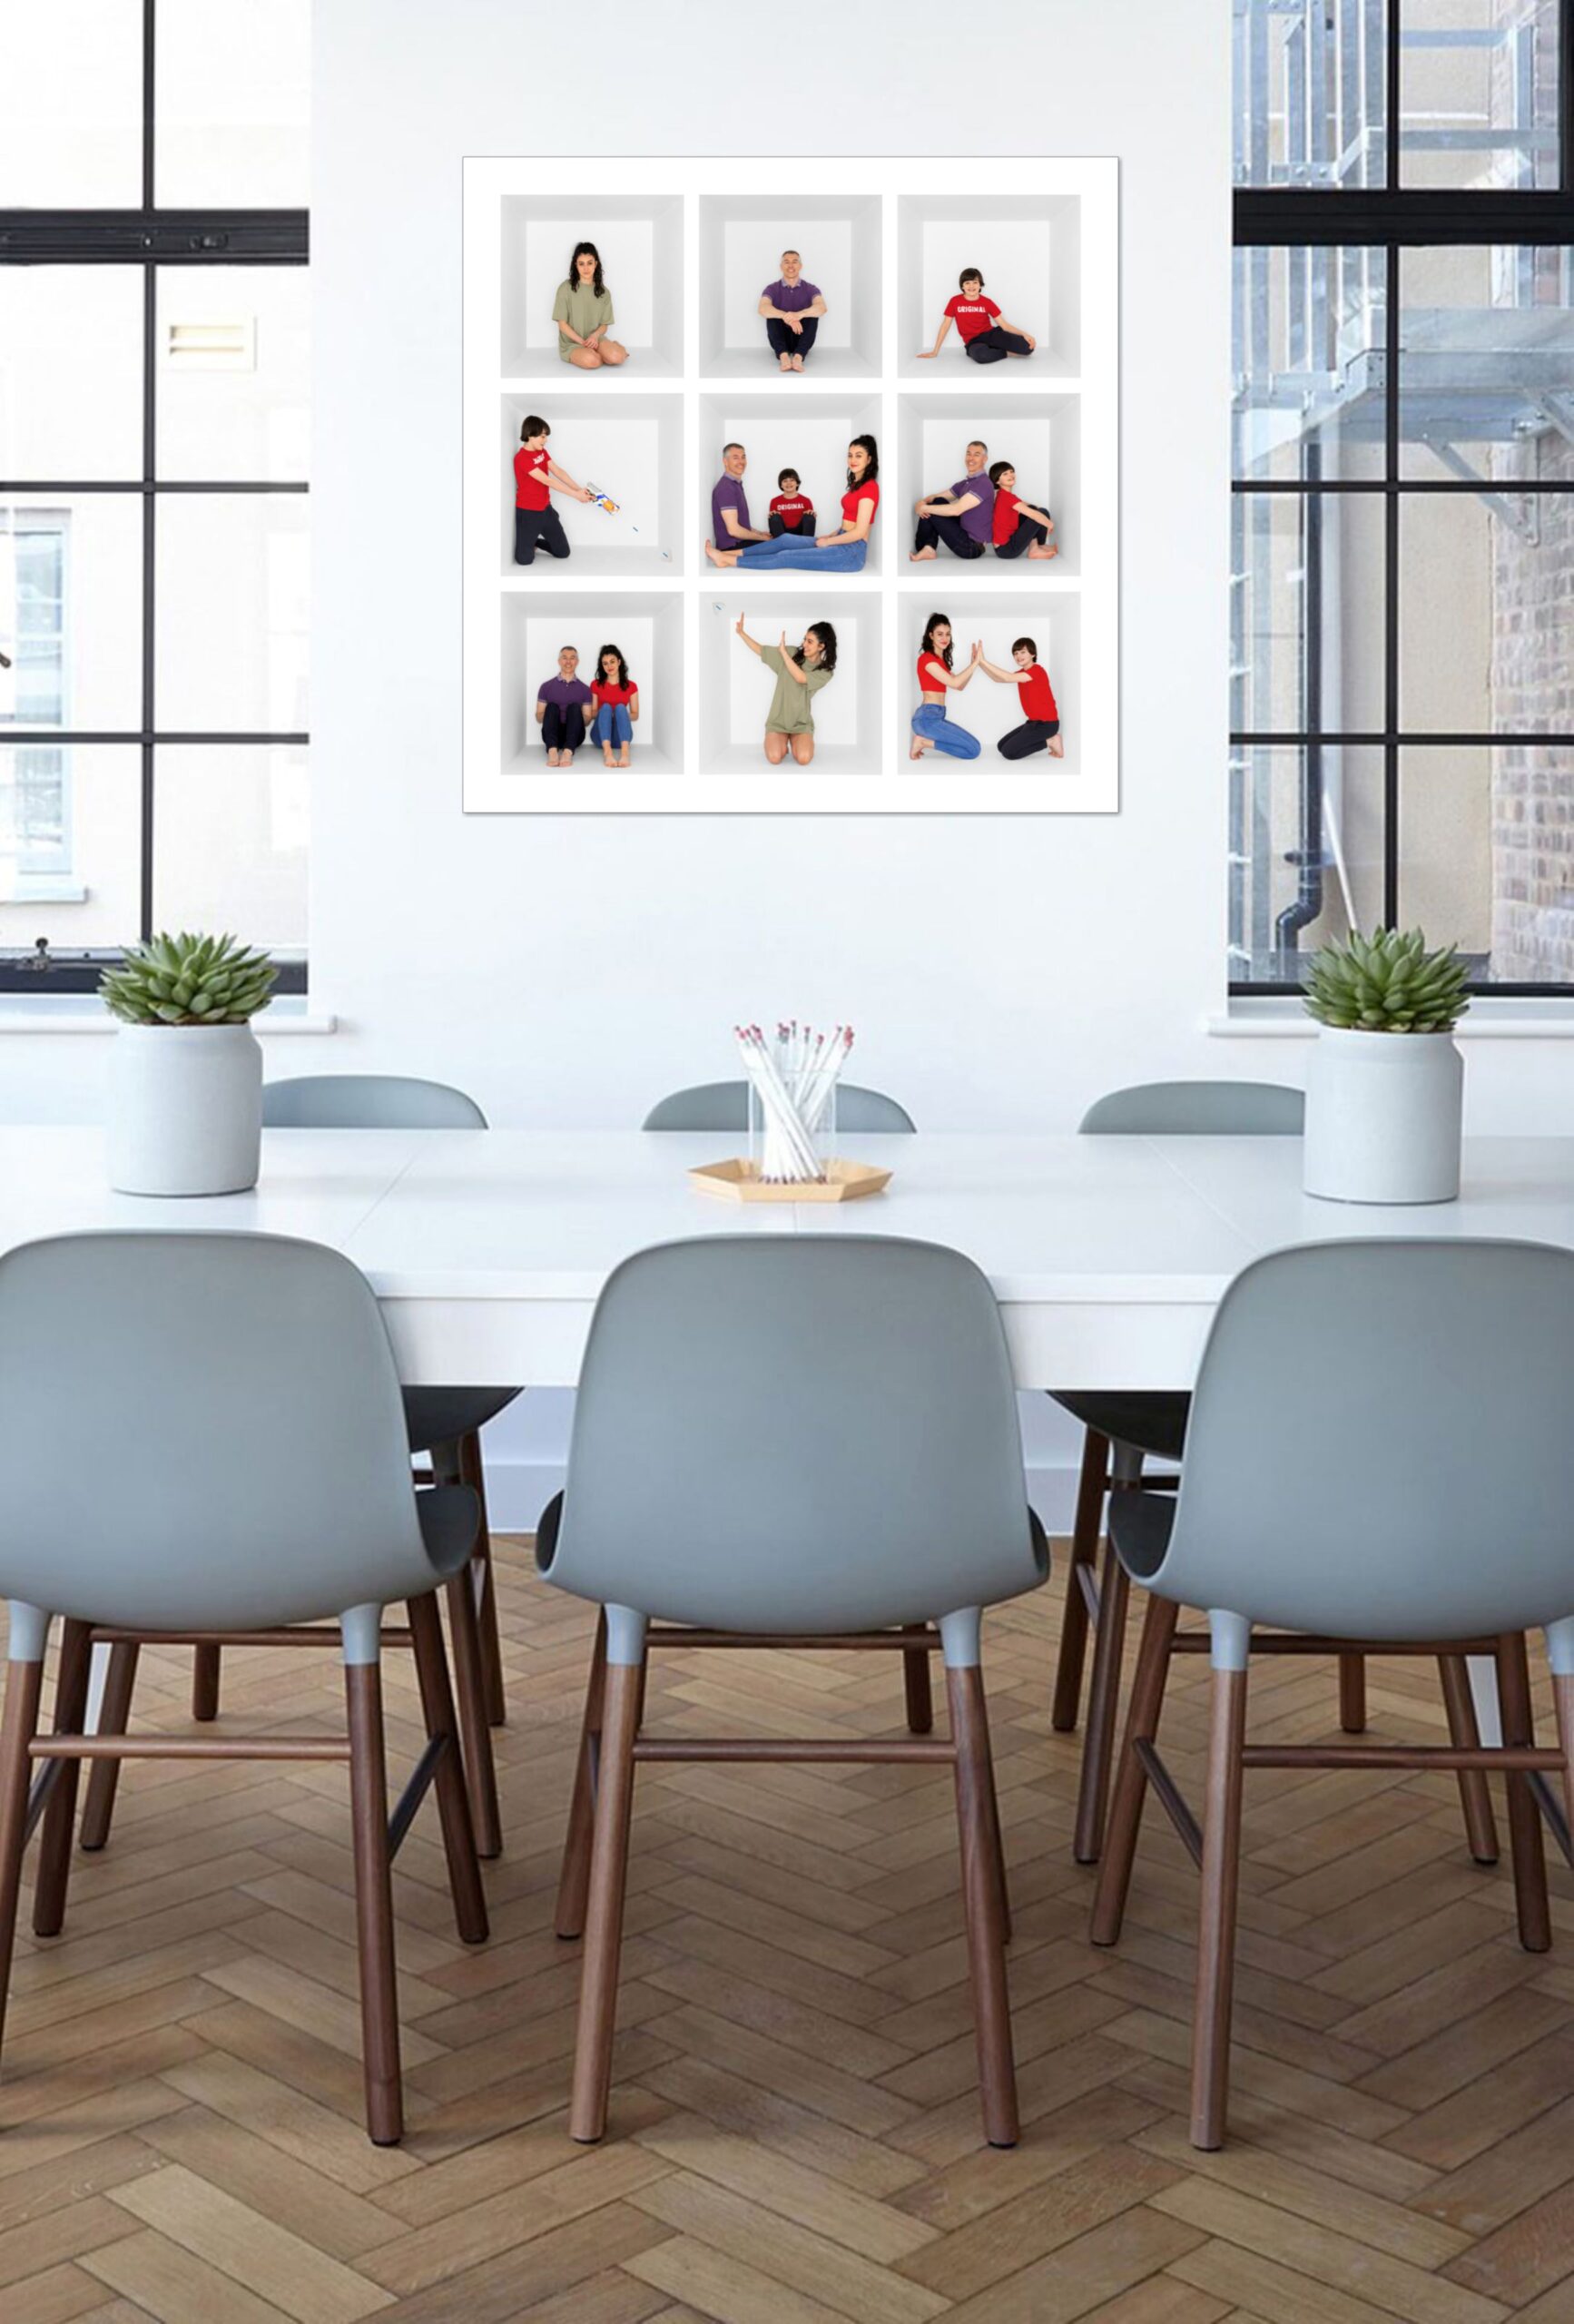 Image of canvas wall art in dining area